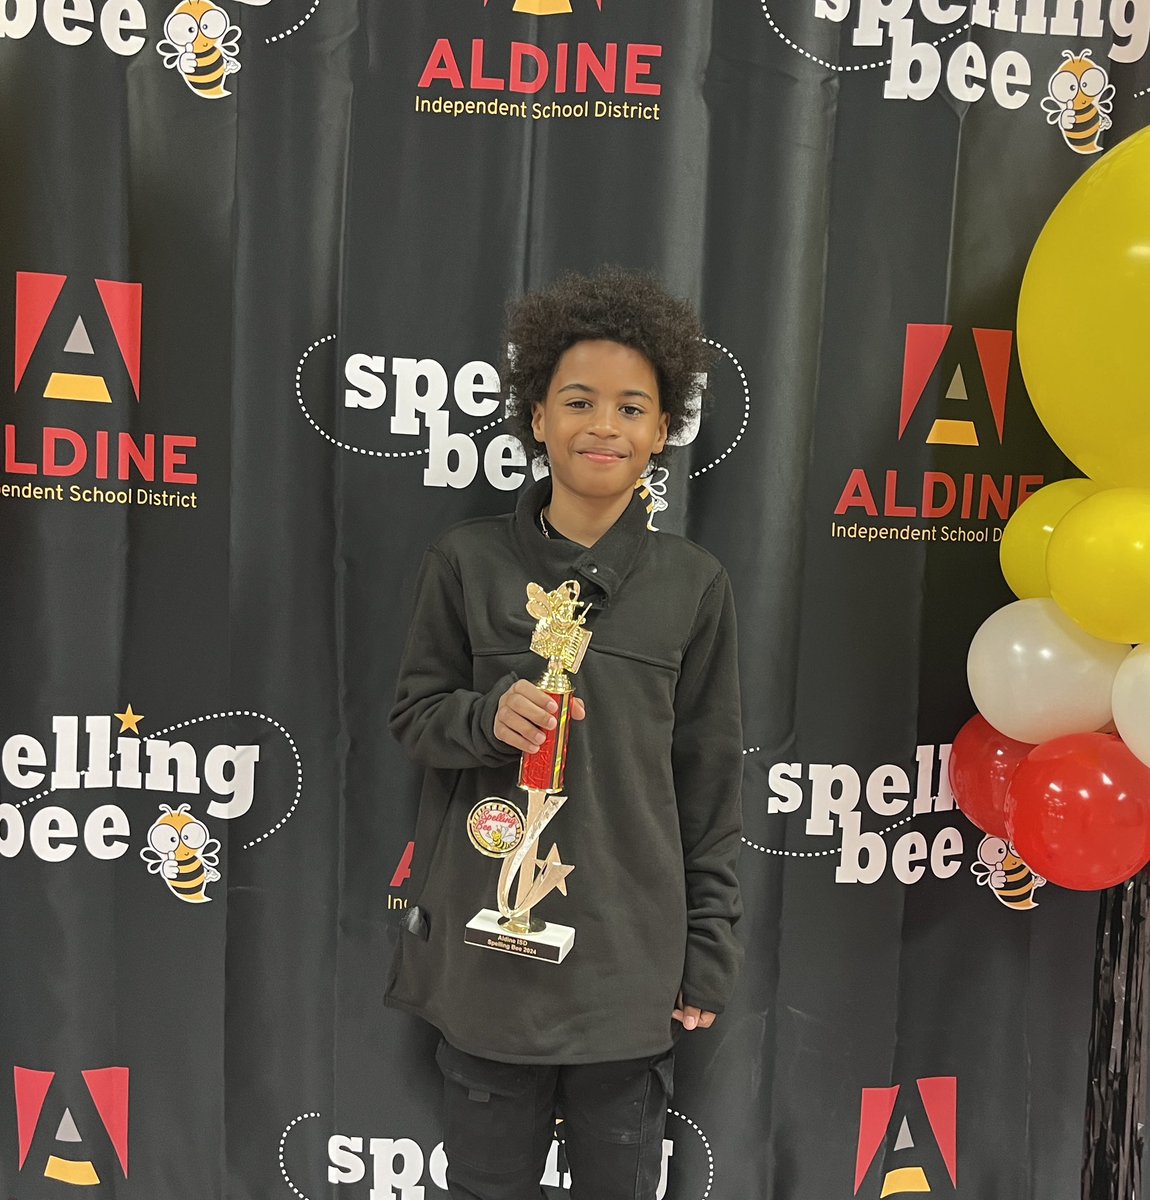 We are very proud of our Spelling Bee District Representative- Kenneth 🤩 His participation in Aldine’s Spelling Bee was phenomenal! His courage and kindness towards others, demonstrated the excellence we seek at Spence 🏆@SpenceES_AISD @SpenceAdventure @AldineISD @DrKAuguste